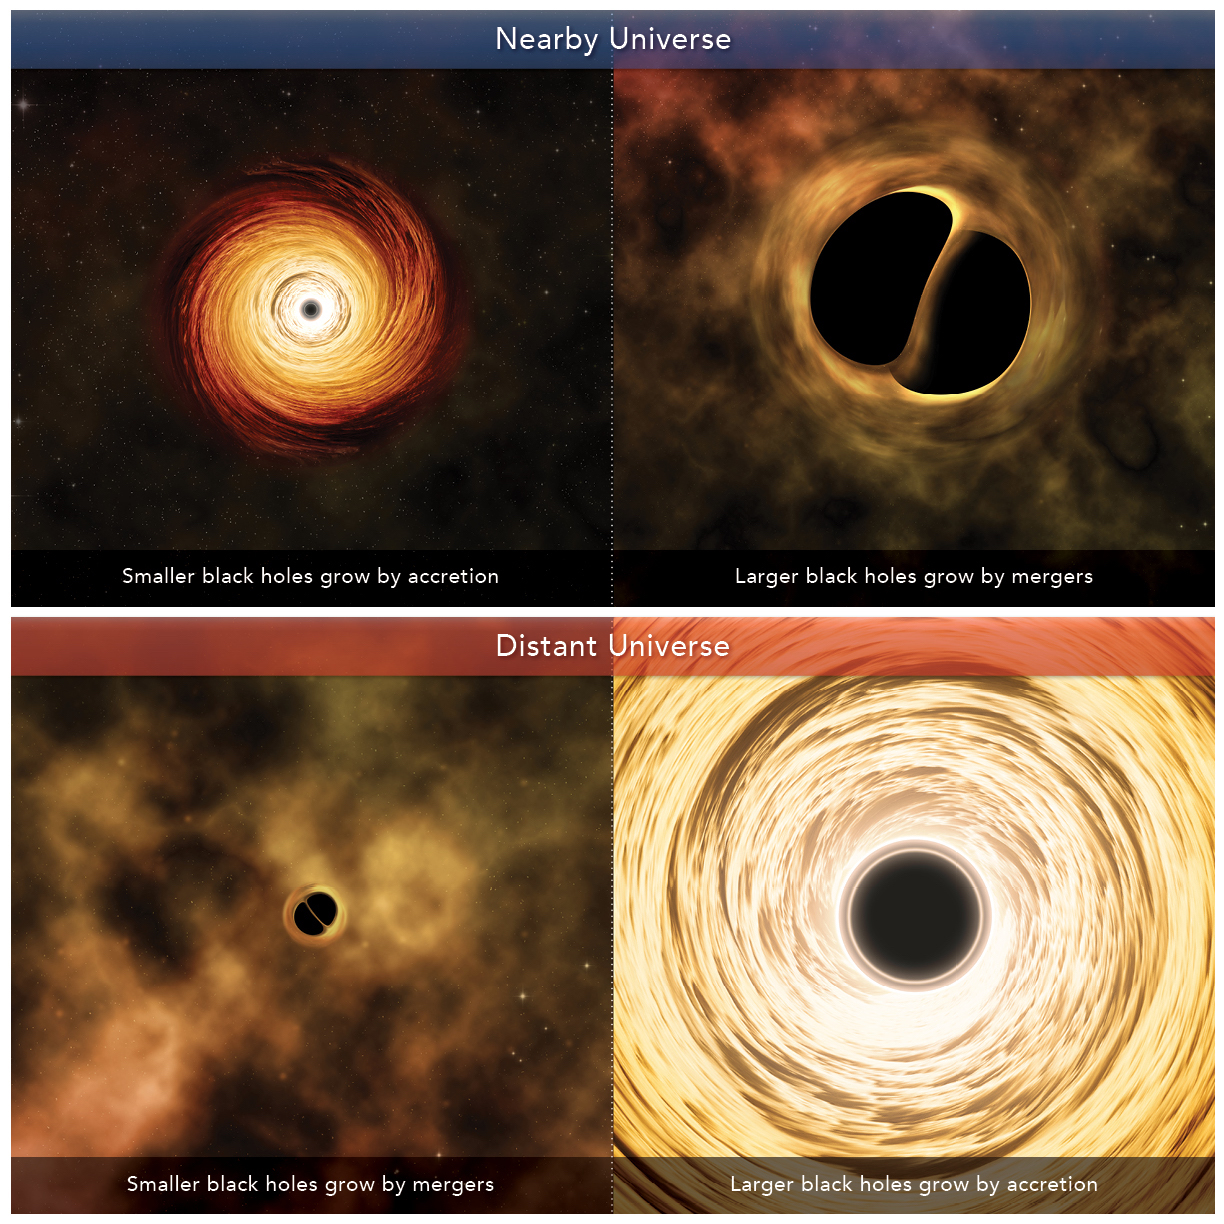 Artist's conception depicting the growth channels of black holes in the nearby and distant universe. In the nearby universe, smaller black holes grow by accretion while larger black holes grow by mergers. In the distant universe, the opposite is true.